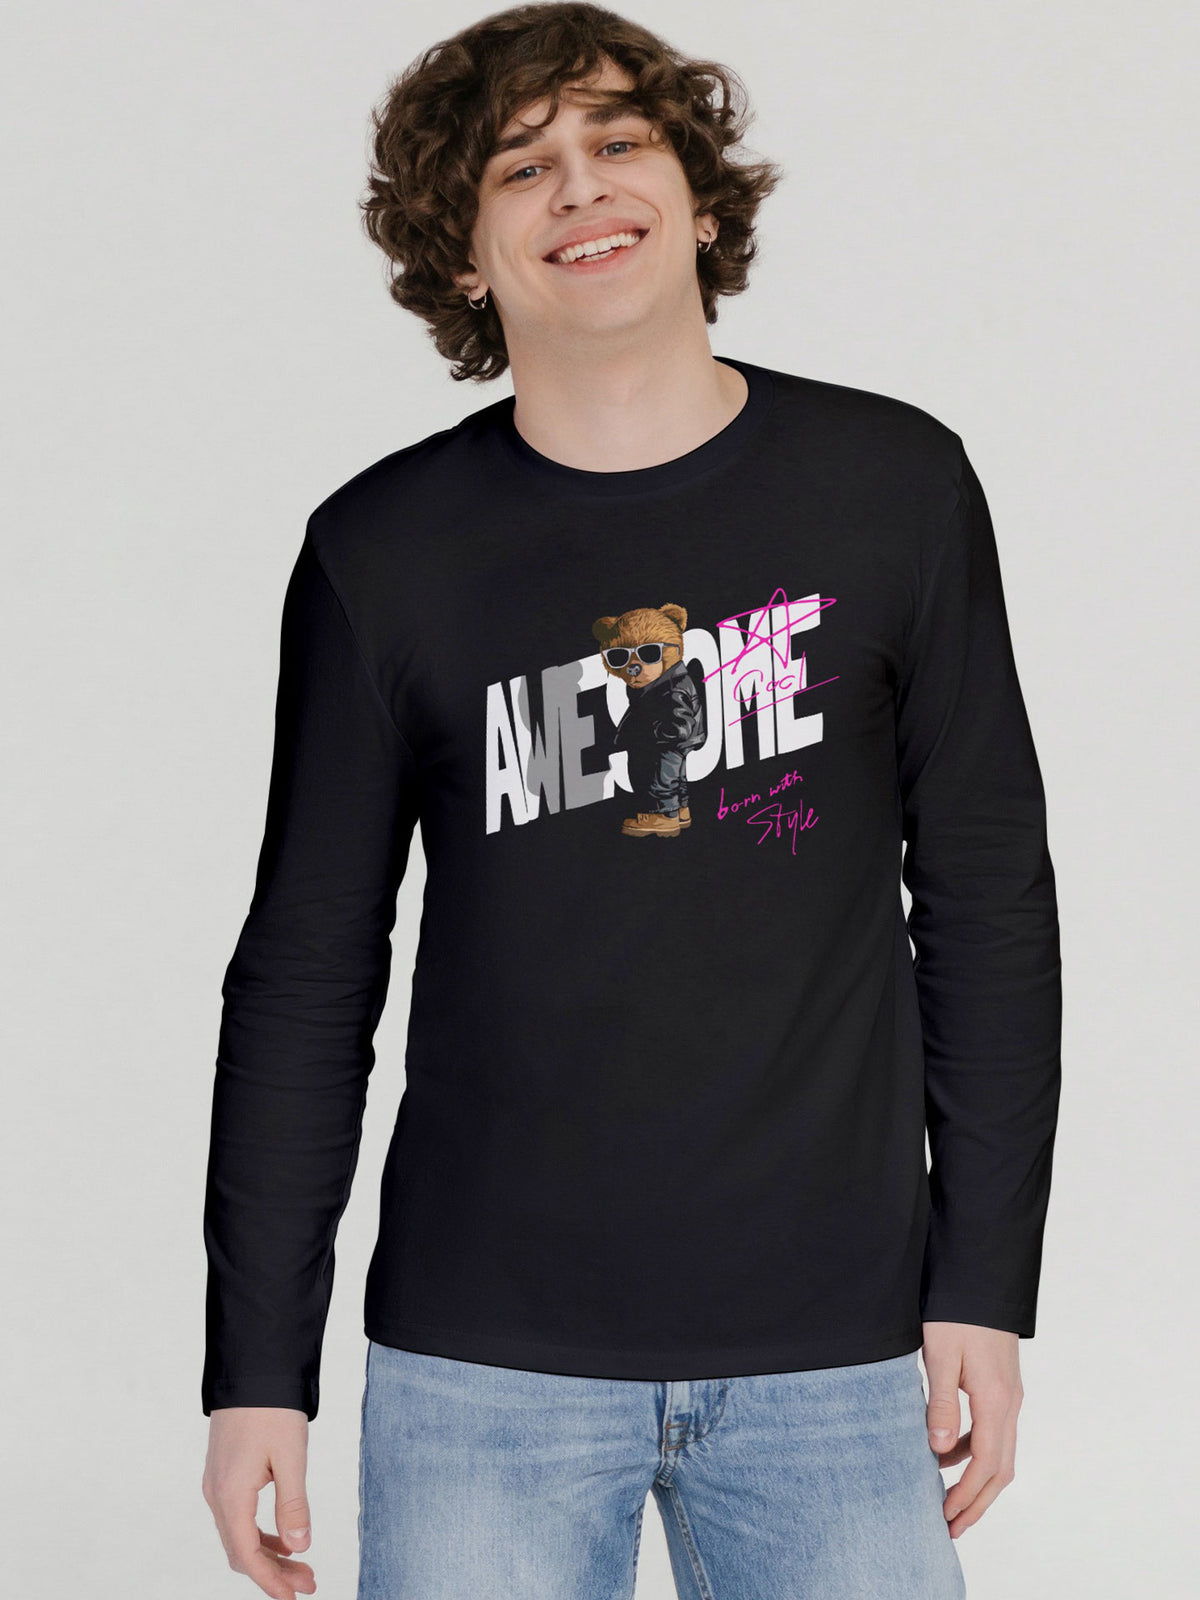 Men's Black Awesome Printed Full-Sleeve T-shirt